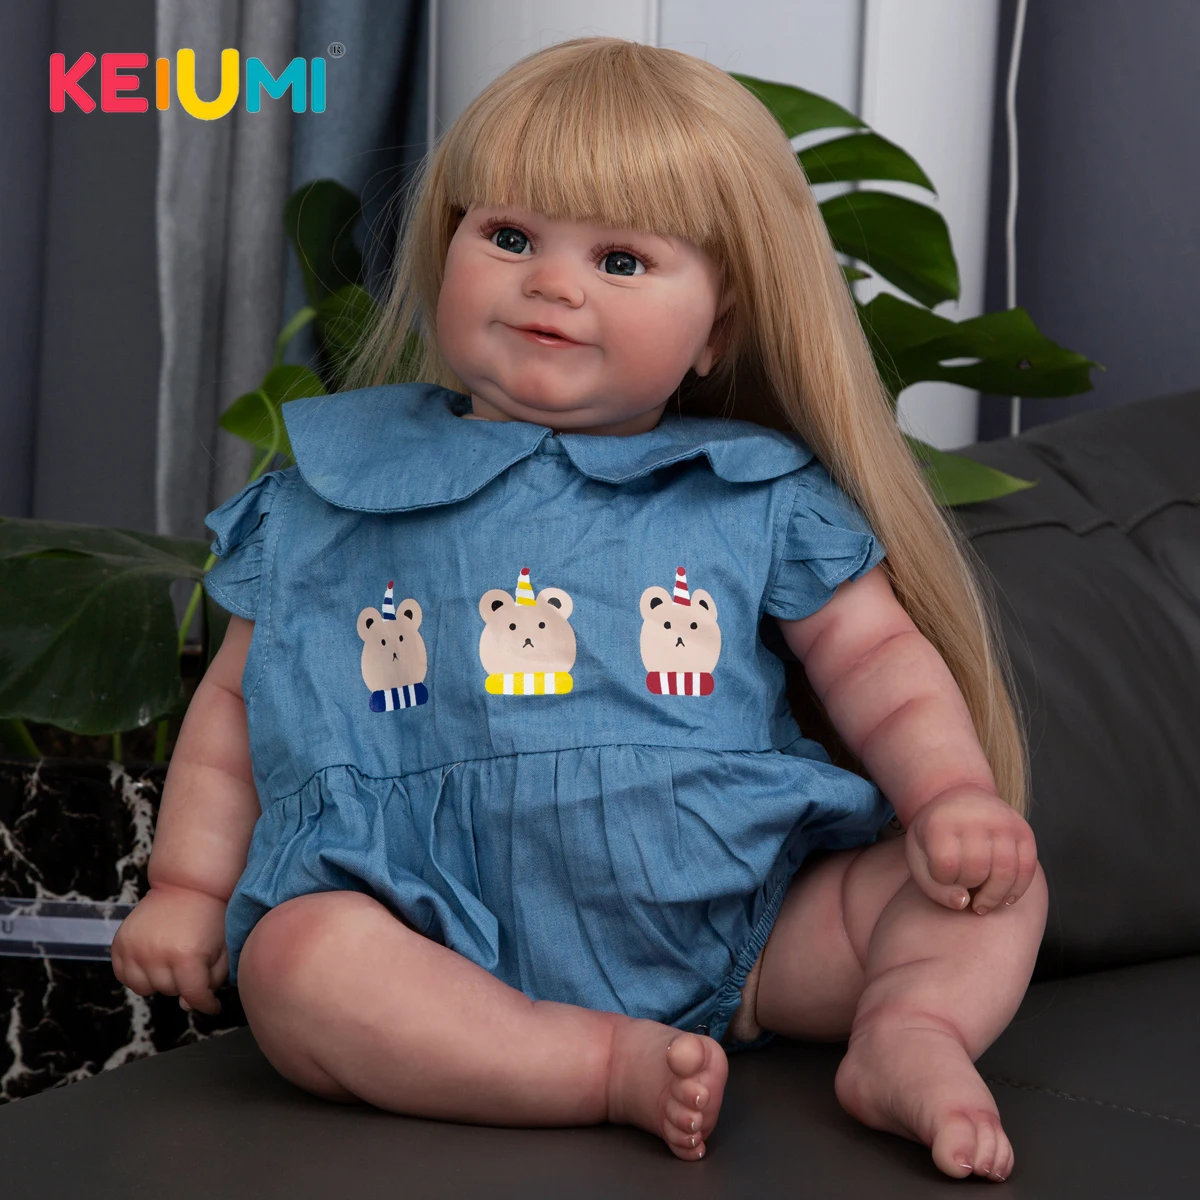 Details about   15" Toddler Solid Silicone Reborn Baby Doll Newborn Realistic Lifelike Girl Kit 